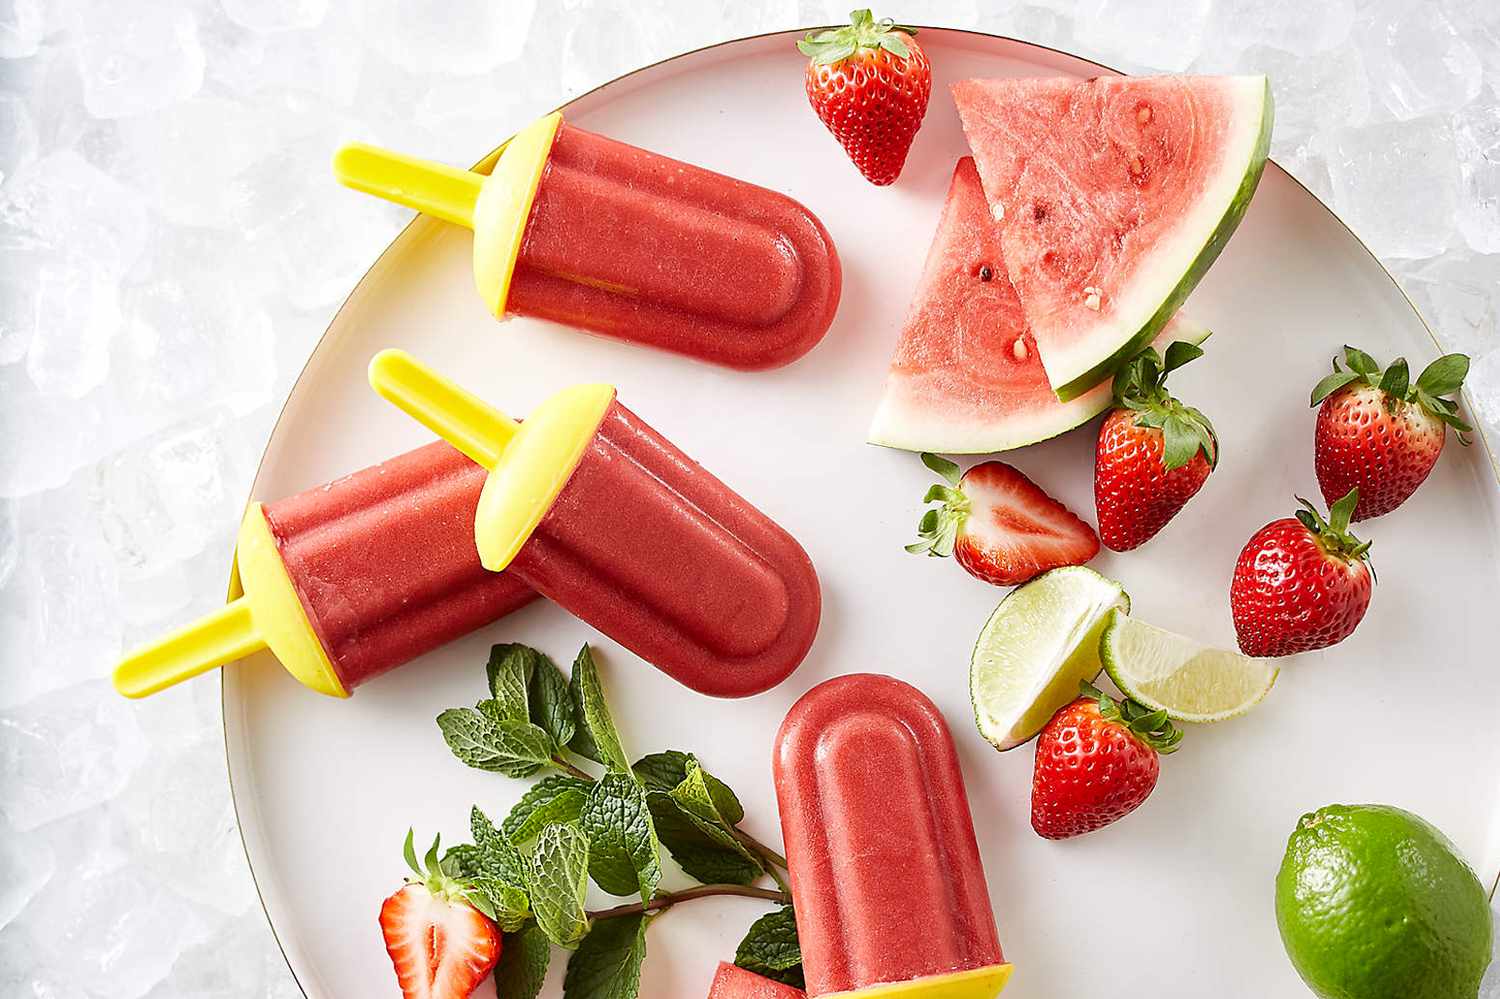 Homemade Ice Pop molds,Silicone Popsicle Molds with Attached Lids,Multi Colors Set of 6 